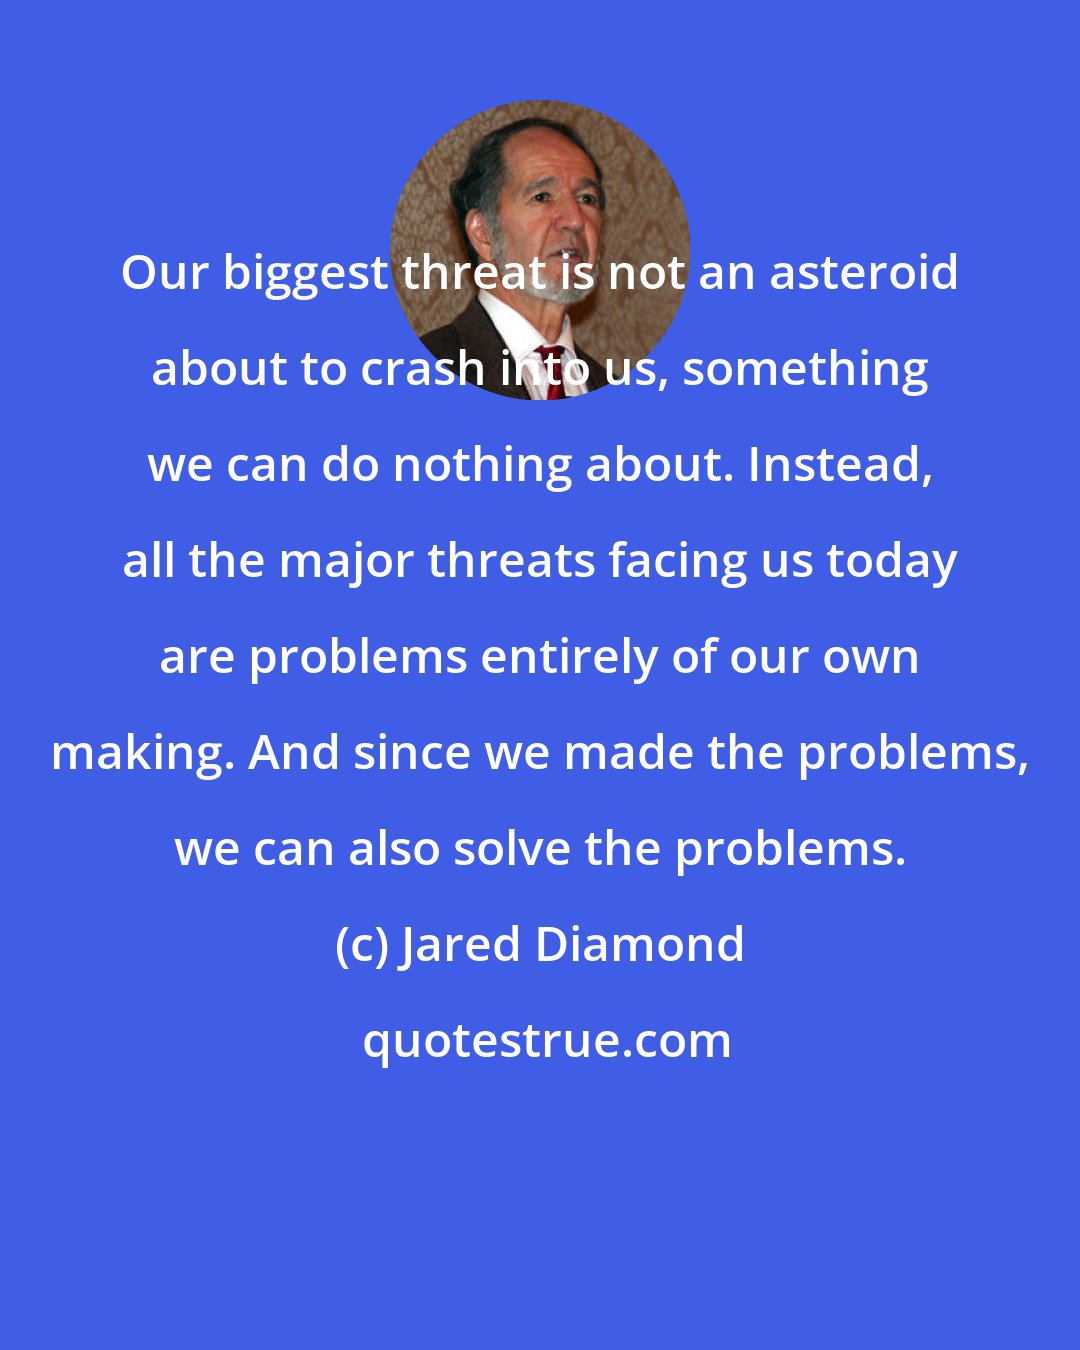 Jared Diamond: Our biggest threat is not an asteroid about to crash into us, something we can do nothing about. Instead, all the major threats facing us today are problems entirely of our own making. And since we made the problems, we can also solve the problems.